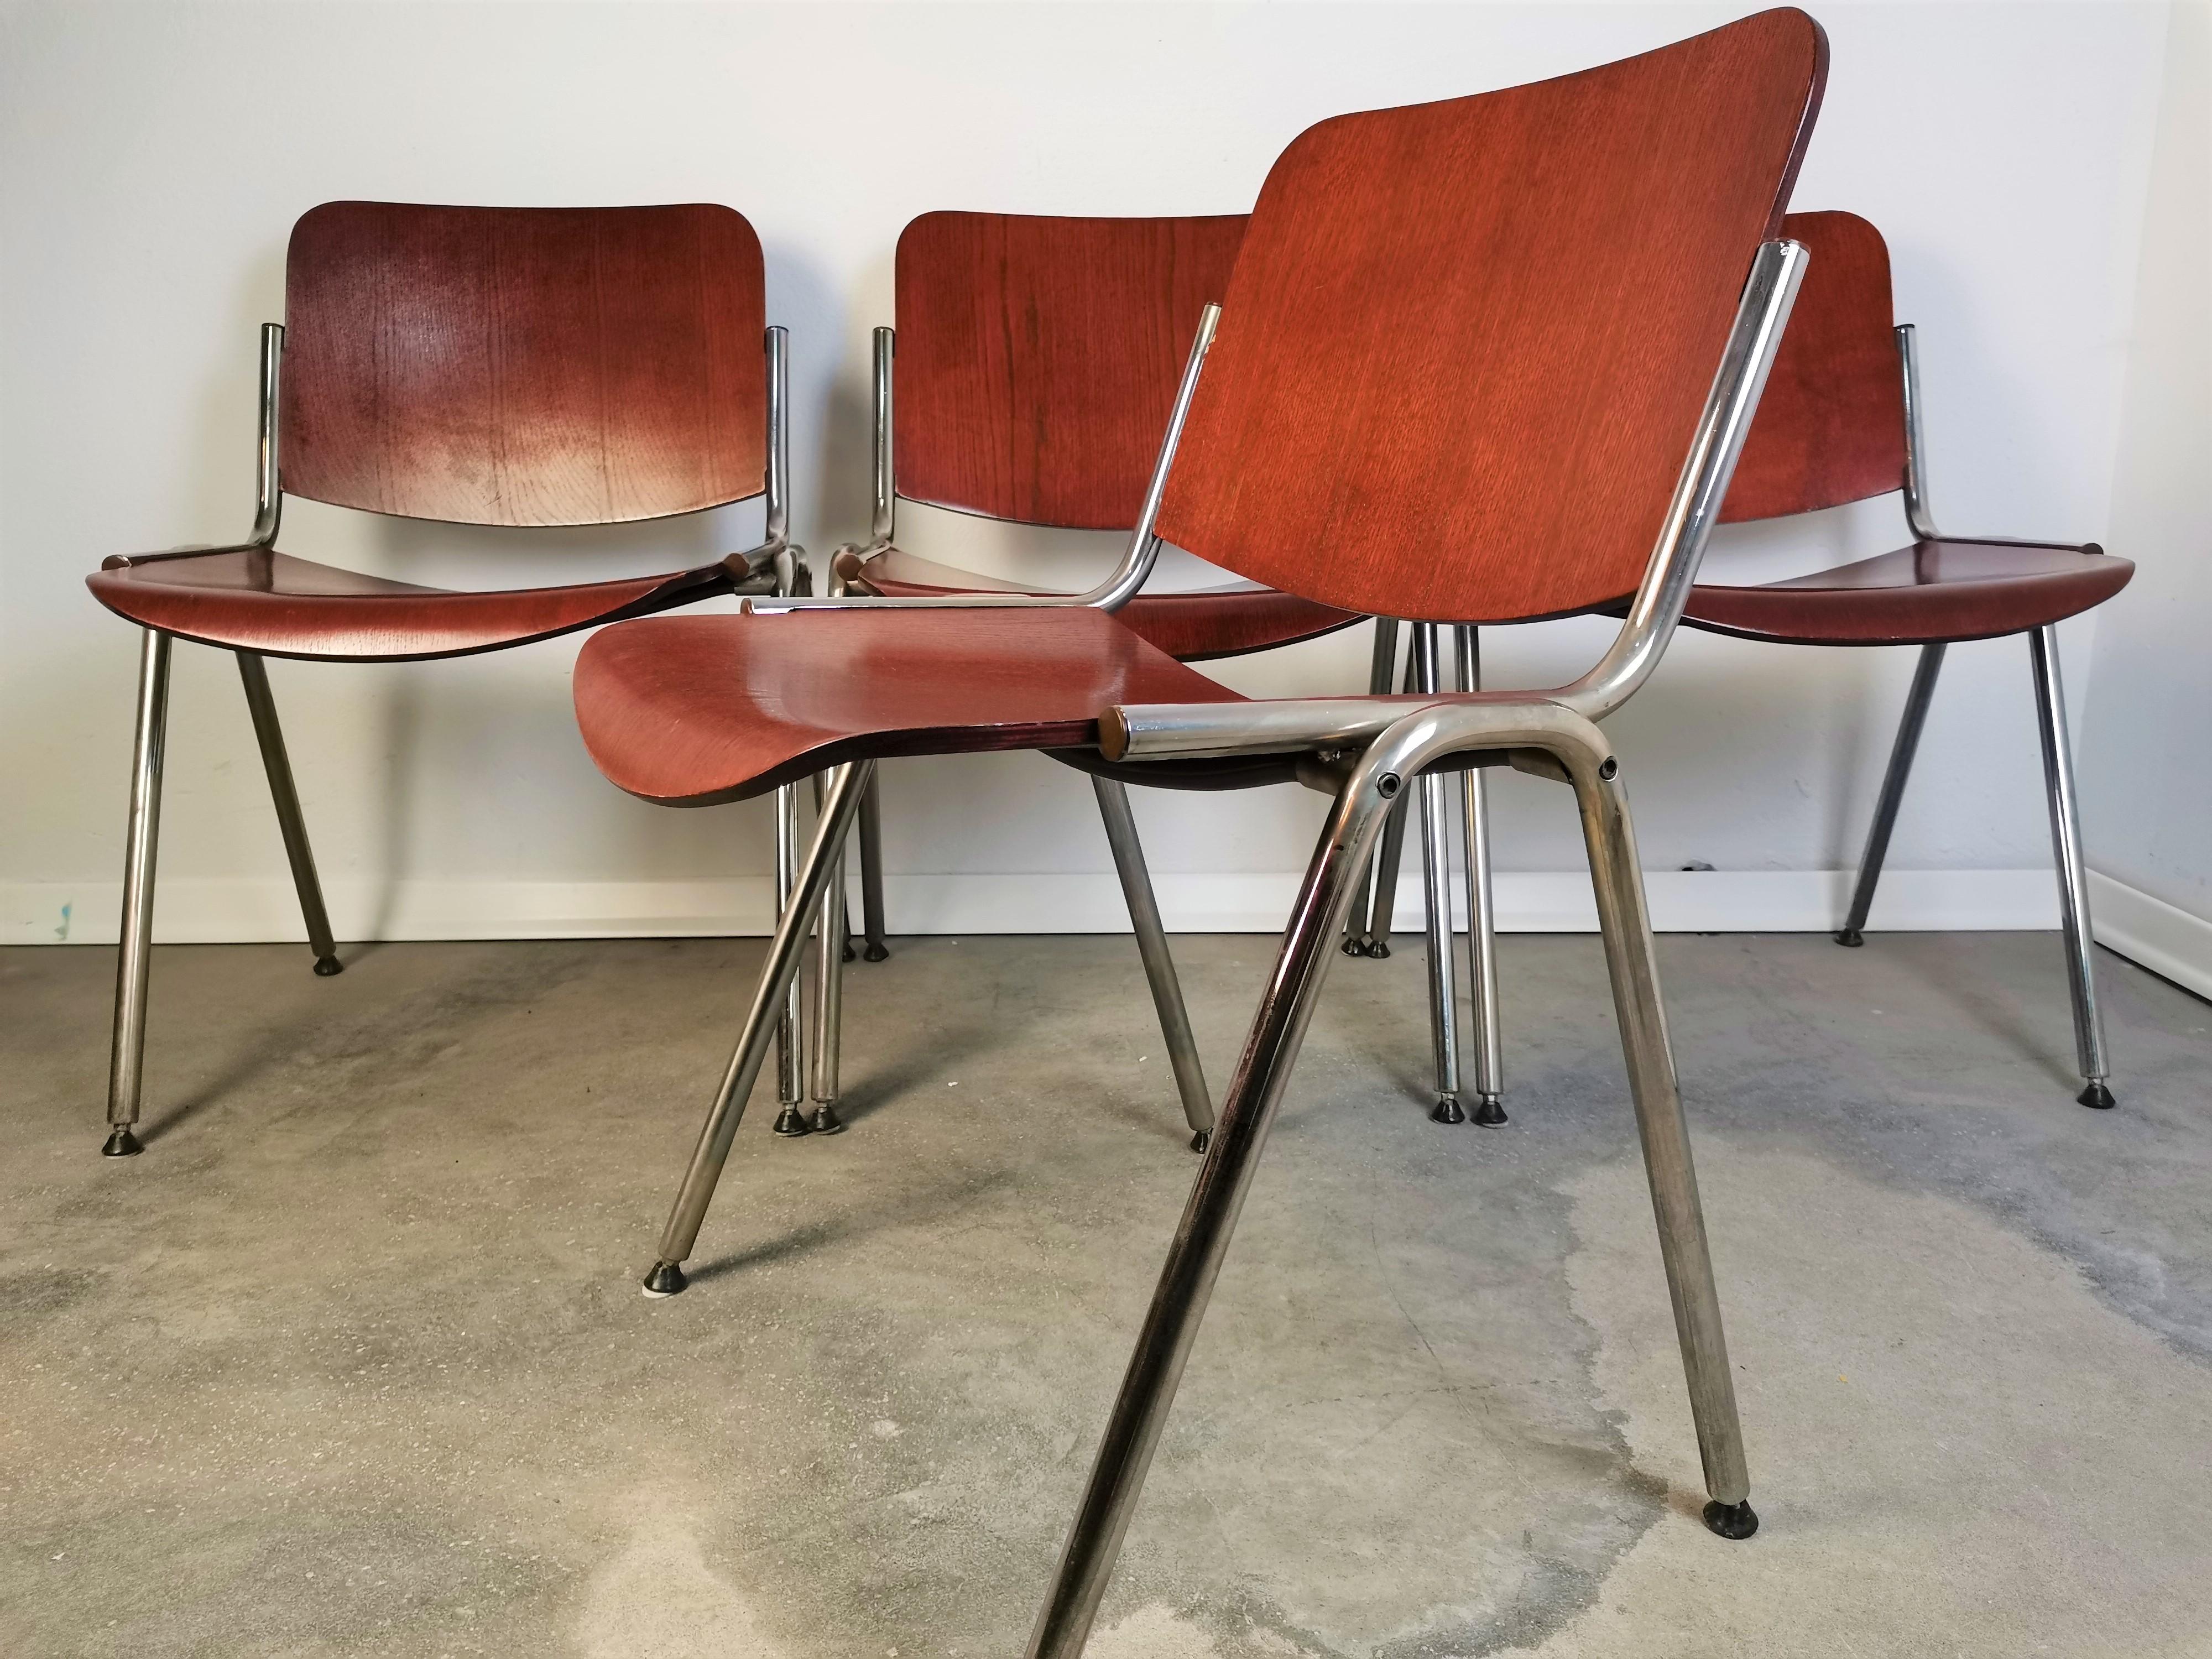 Stackable chairs
Manufacturer: Stol Kamnik
Country of Manufacturer: Slovenia
Period: 1990s
Materials: Chrome, plywood
Condition: very good vintage condition.